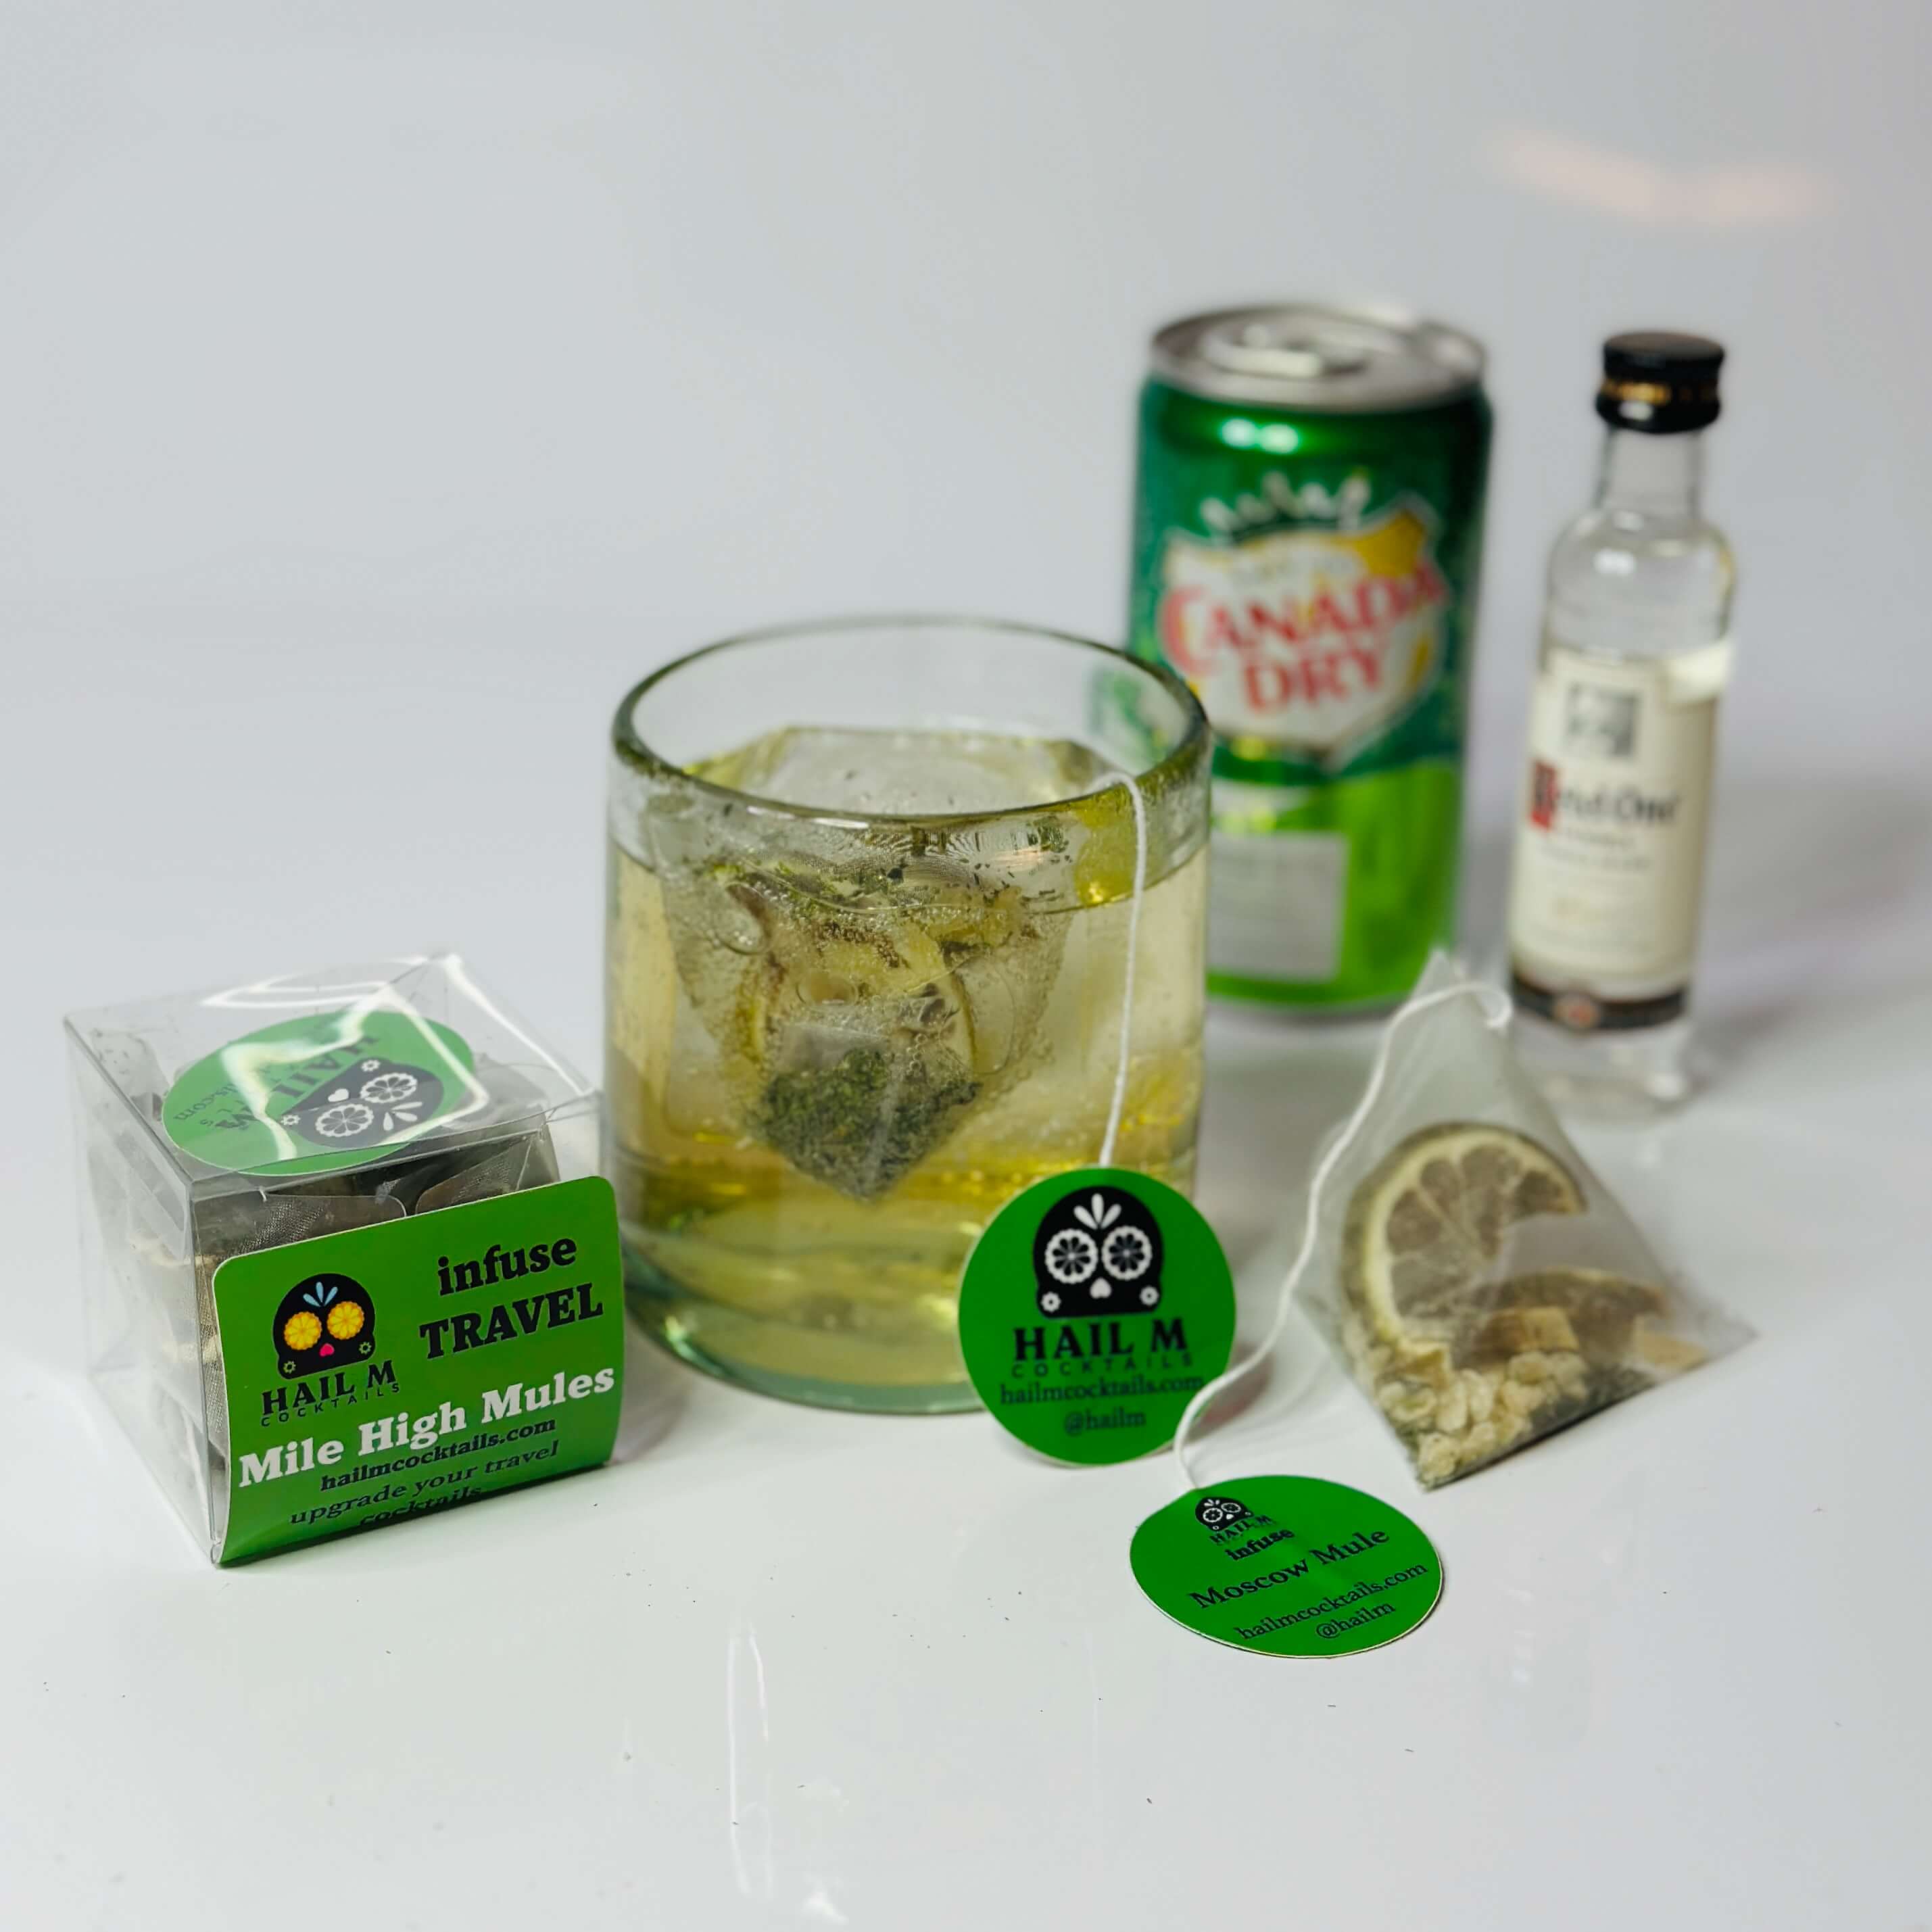 Moscow Mule Cocktail Travel Kit